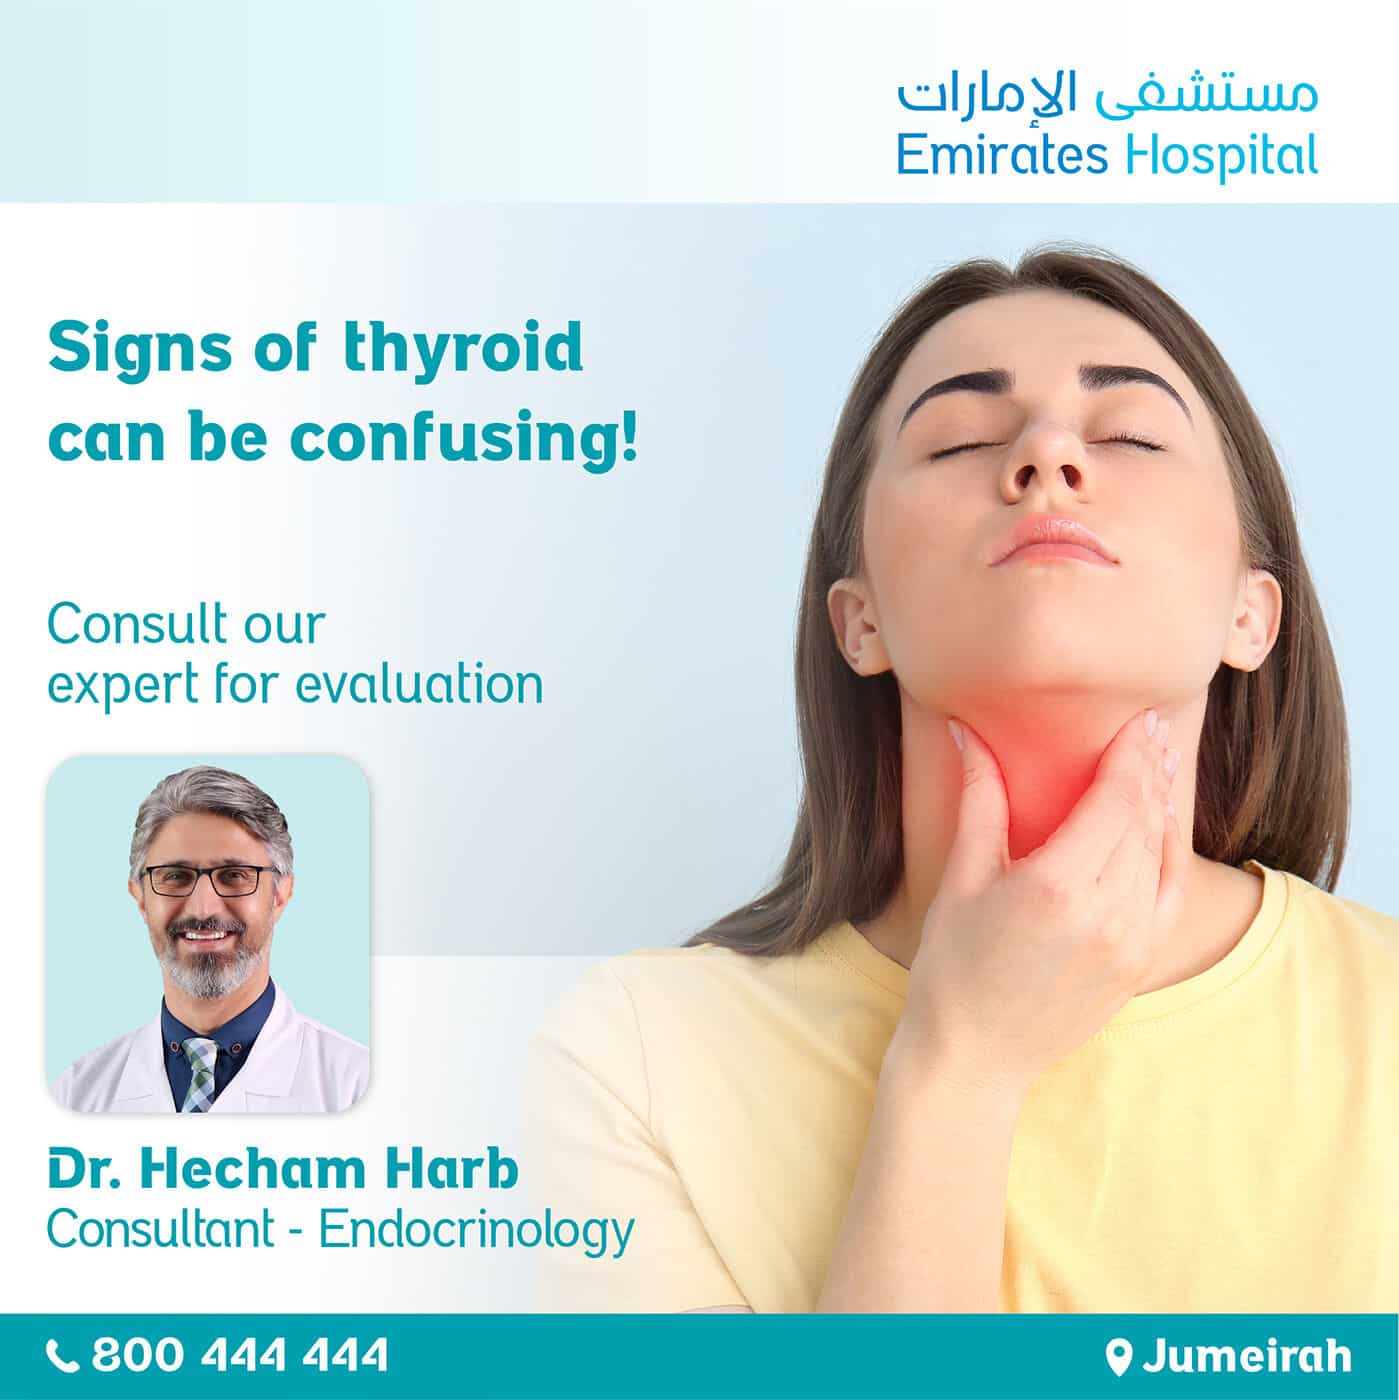 Signs of Thyroid can be confusing